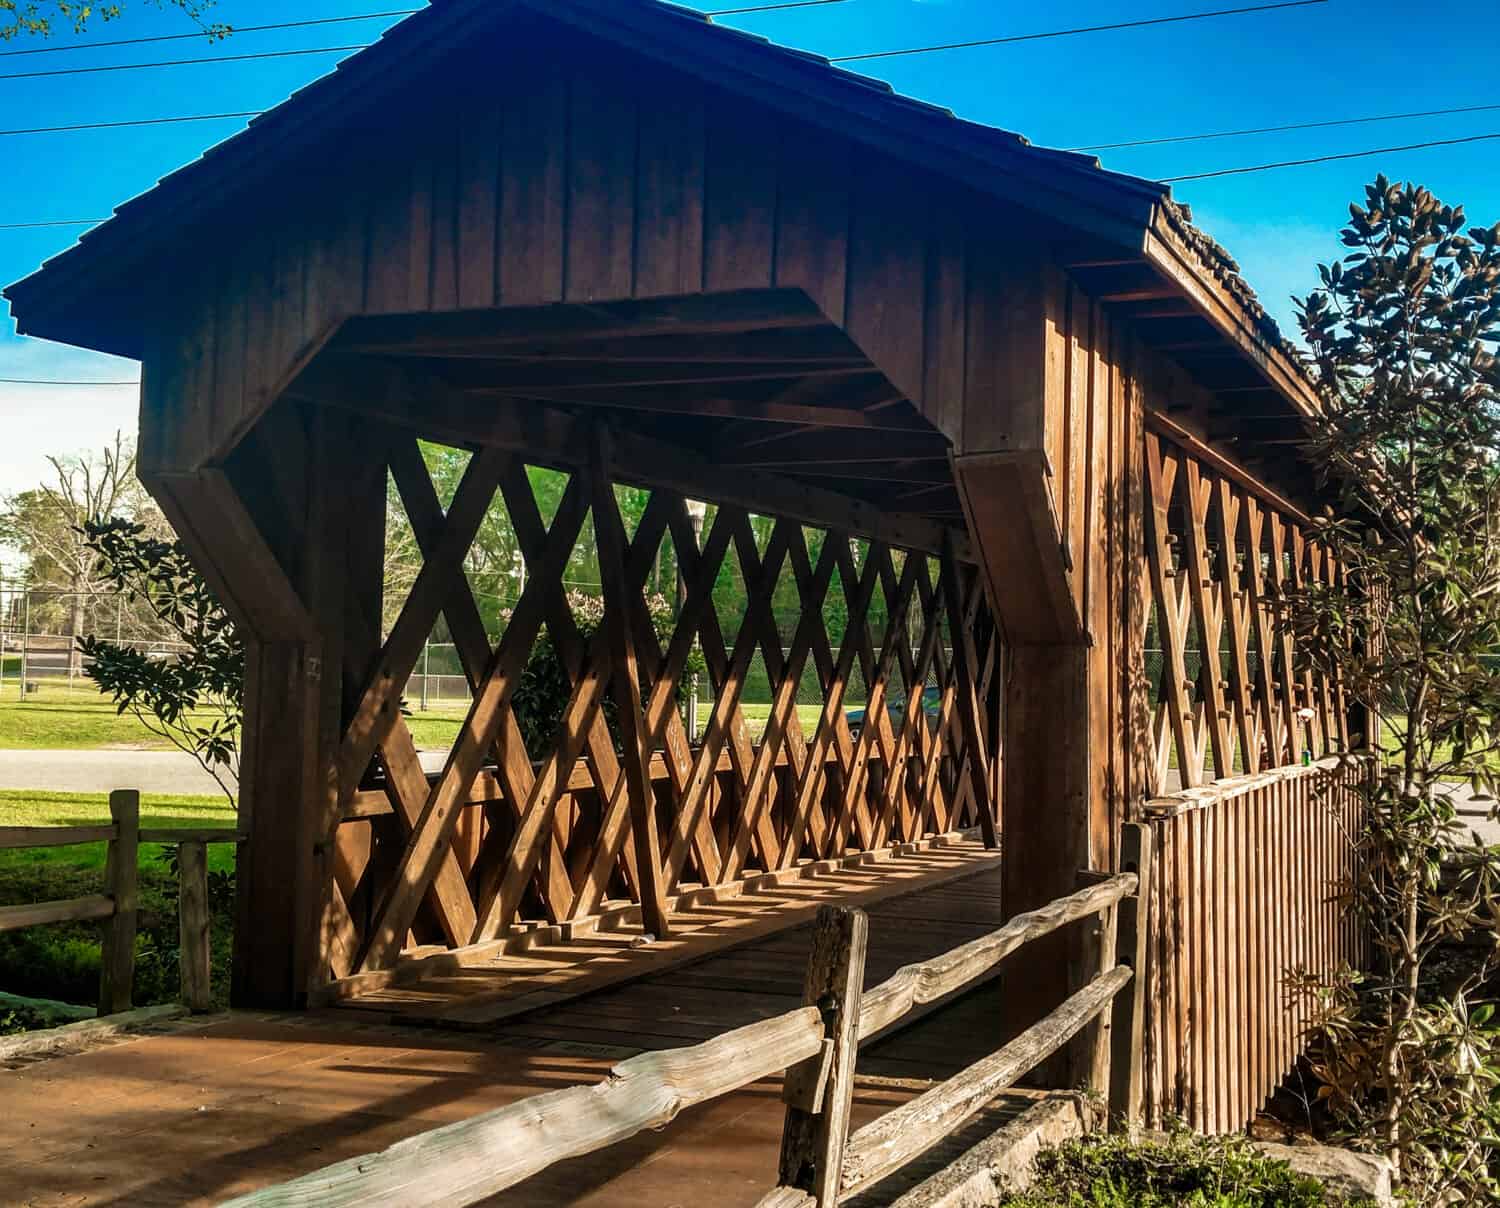 This is a wooden covered bridge in Municipal Park, Opelika, AL